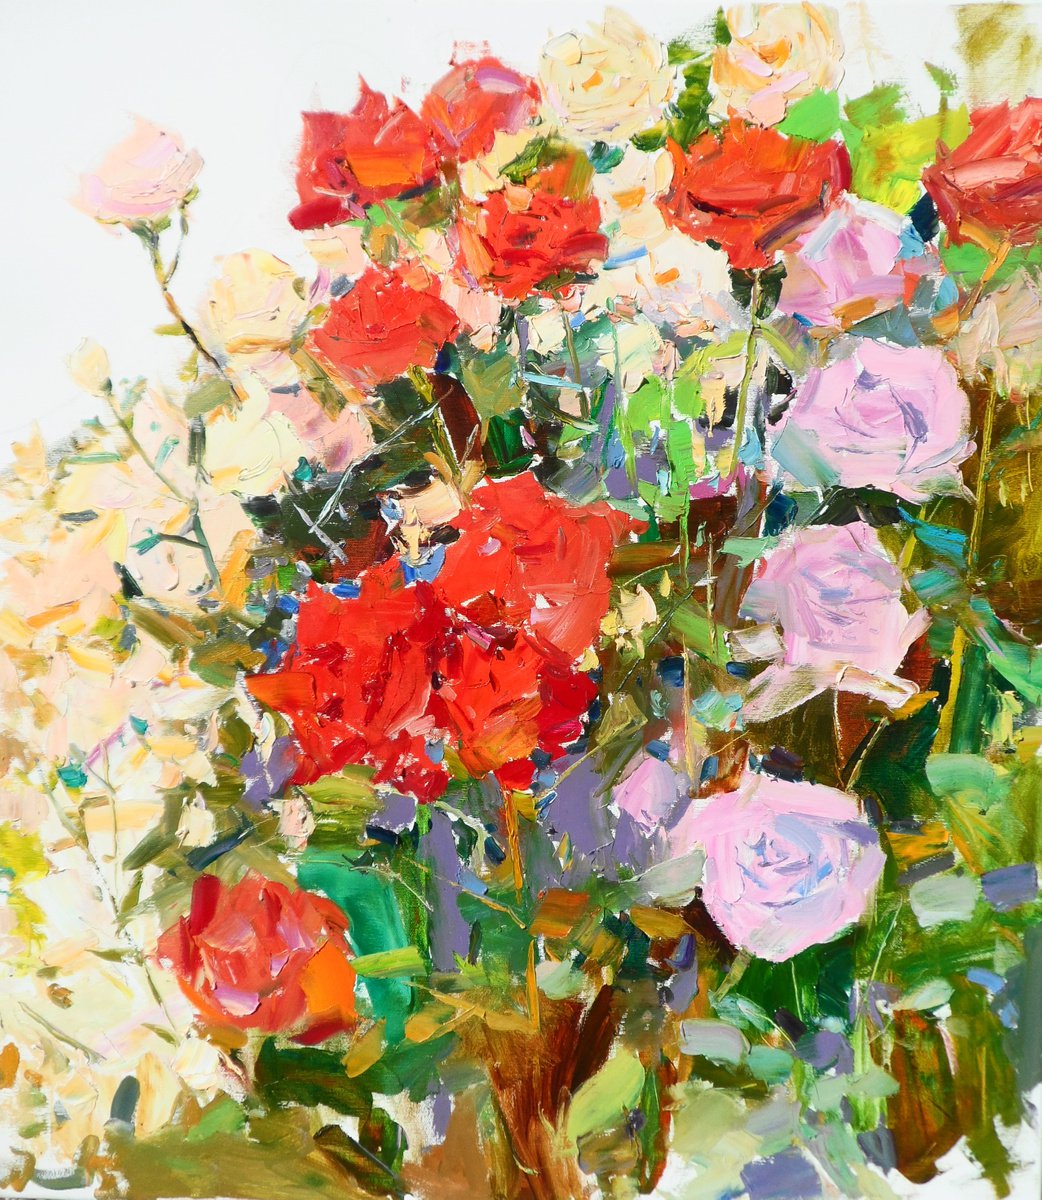 Roses in my garden 2022 by Yehor Dulin